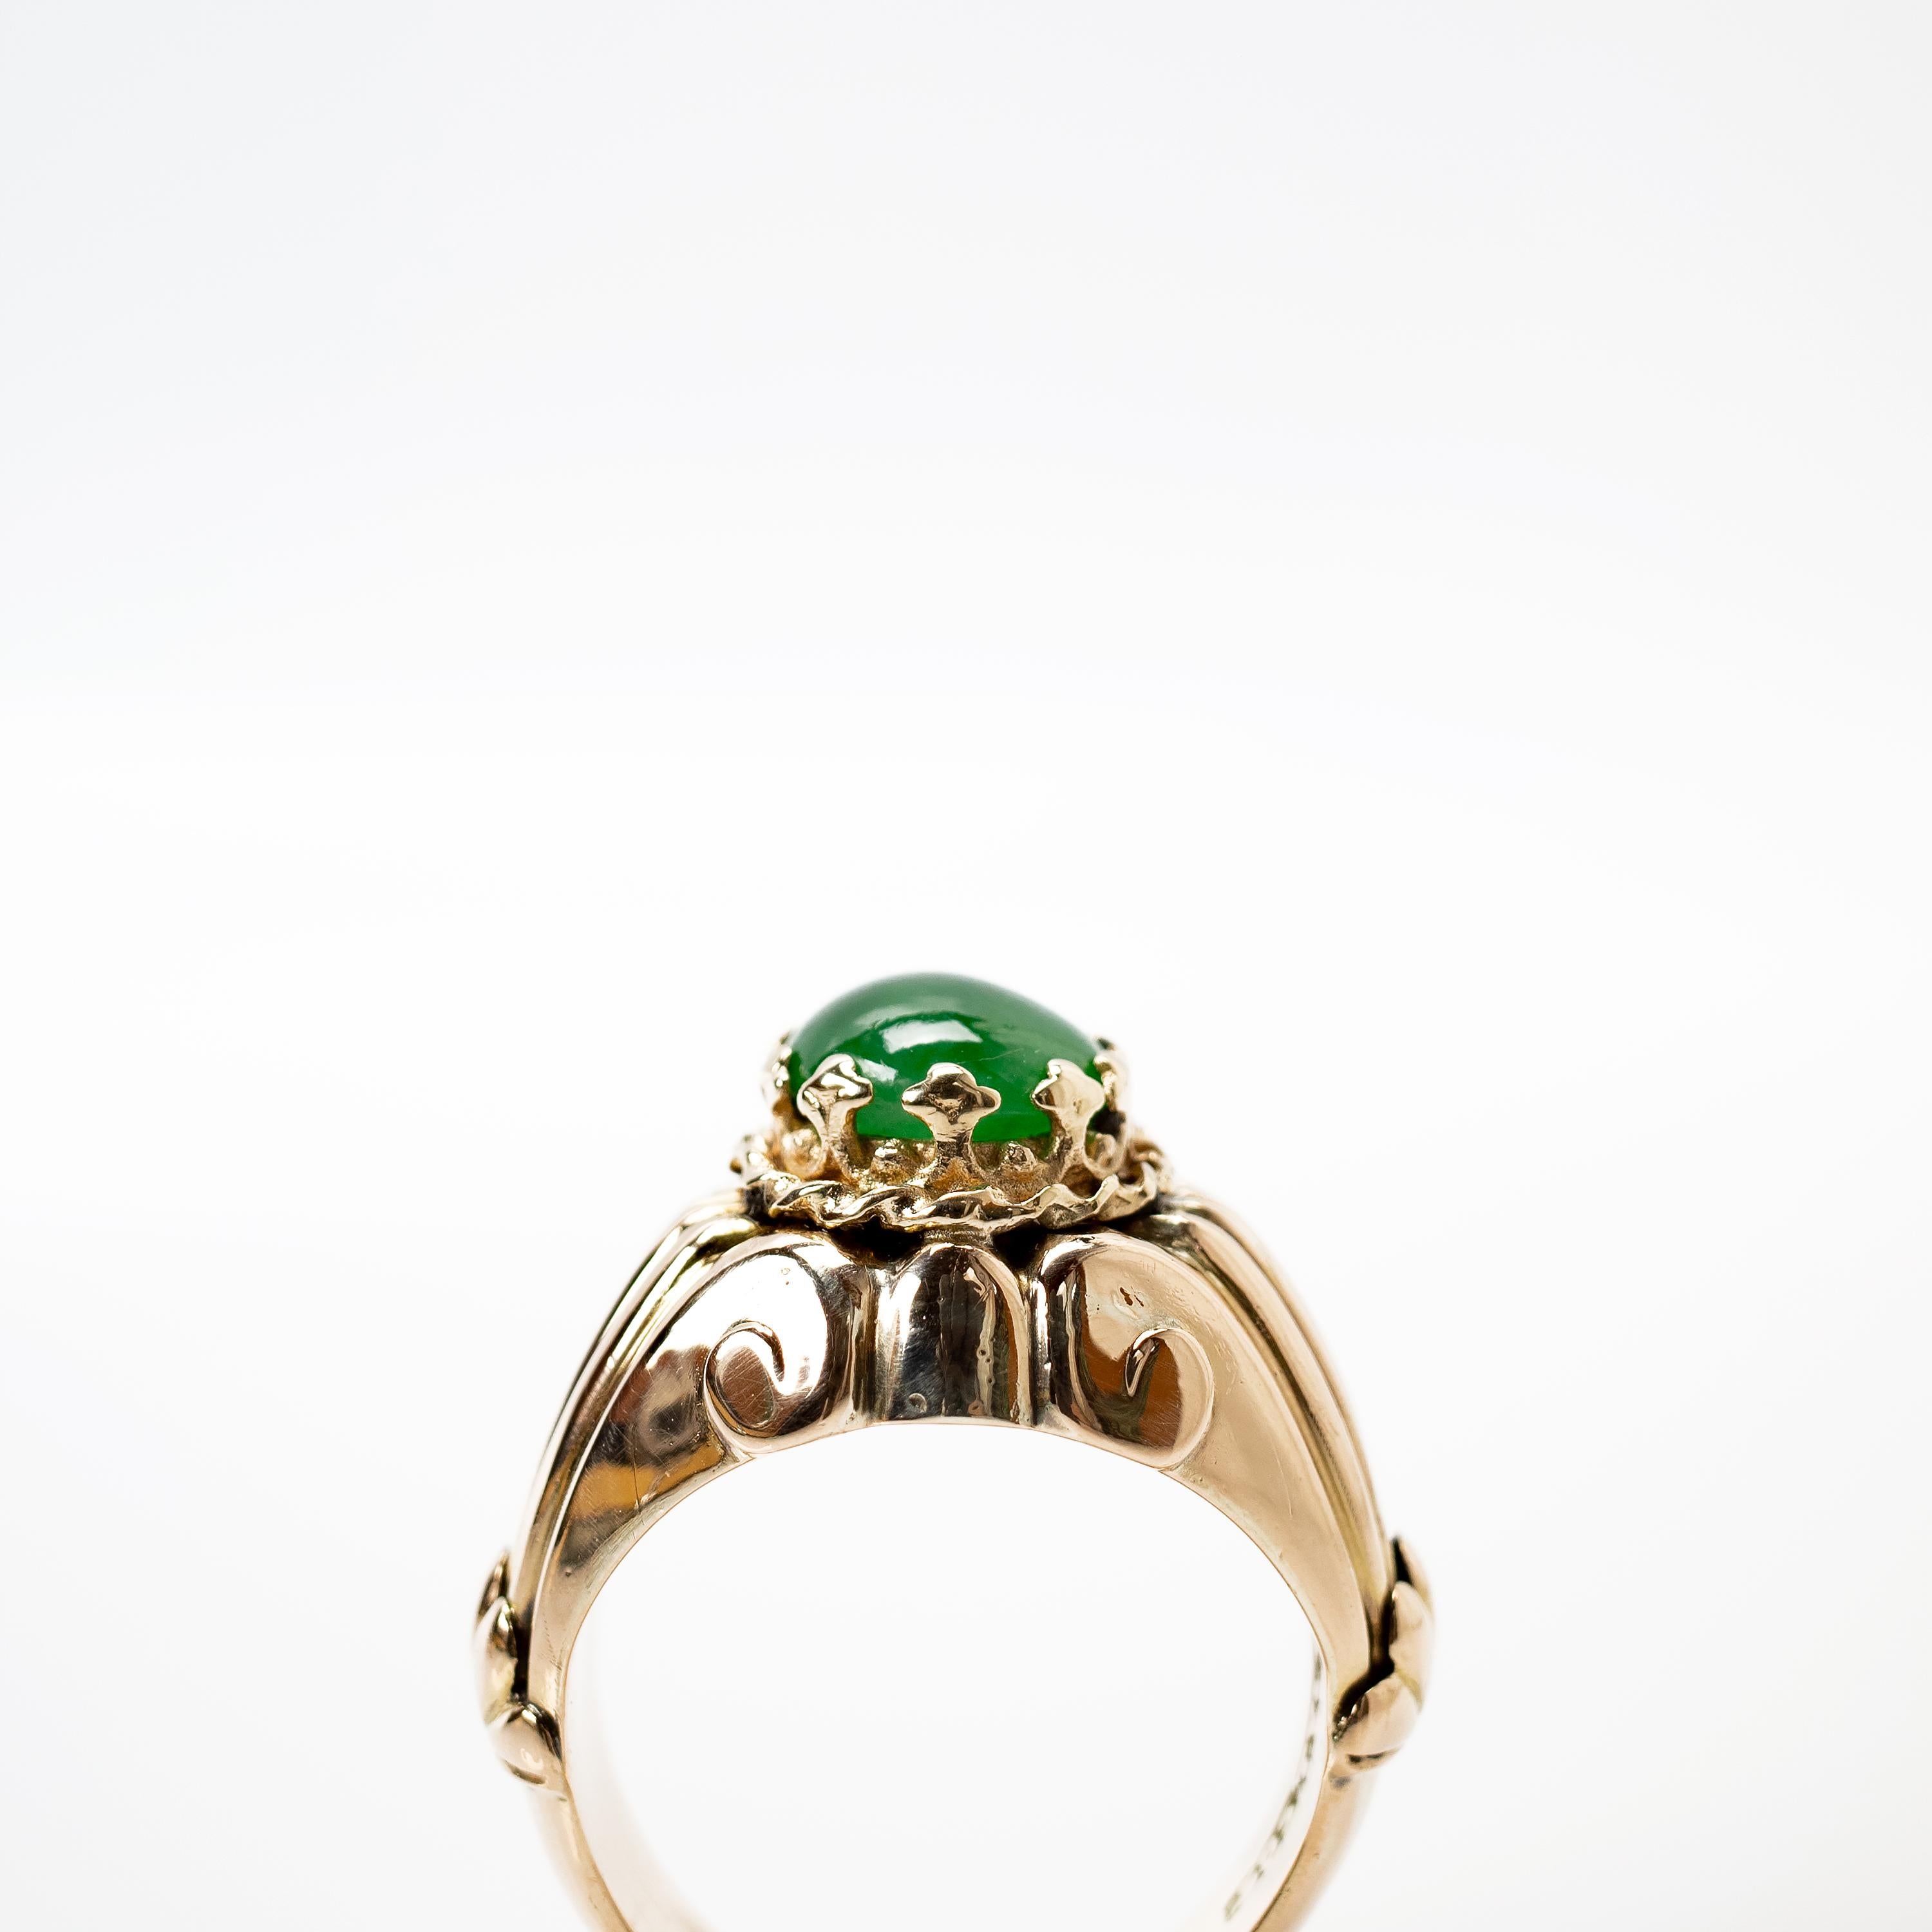 Oval Cut Imperial Jade Ring in Regal Coronet Setting 